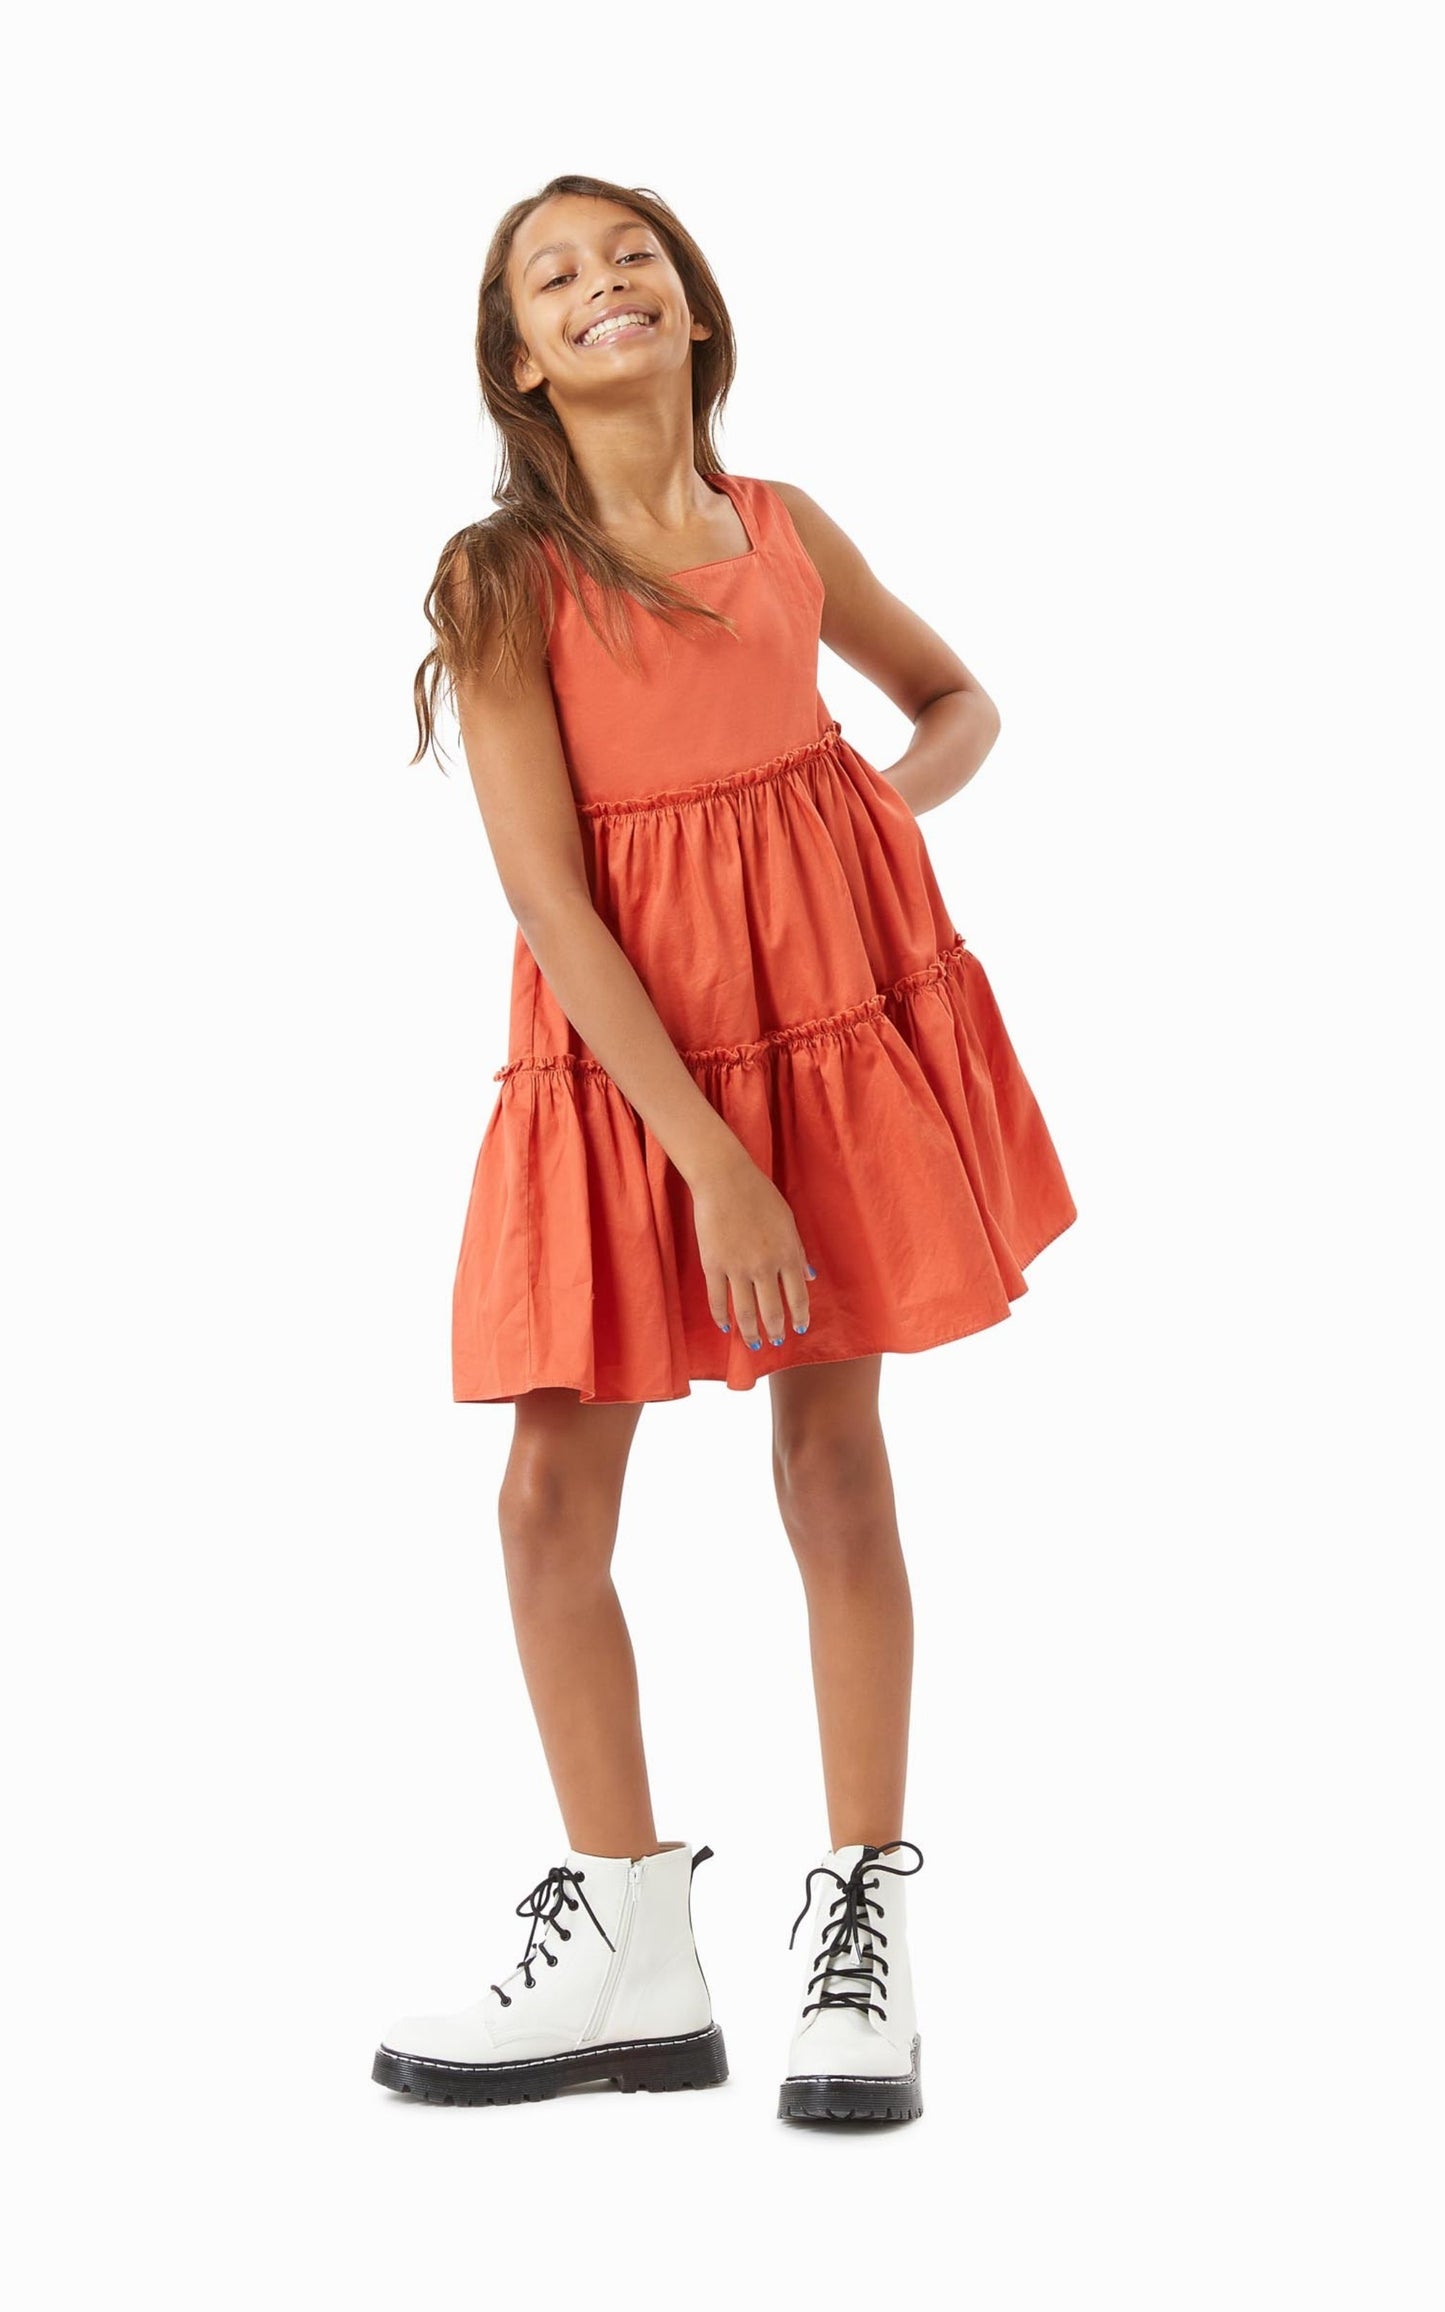 Girl in motion wearing rust tiered baby doll dress